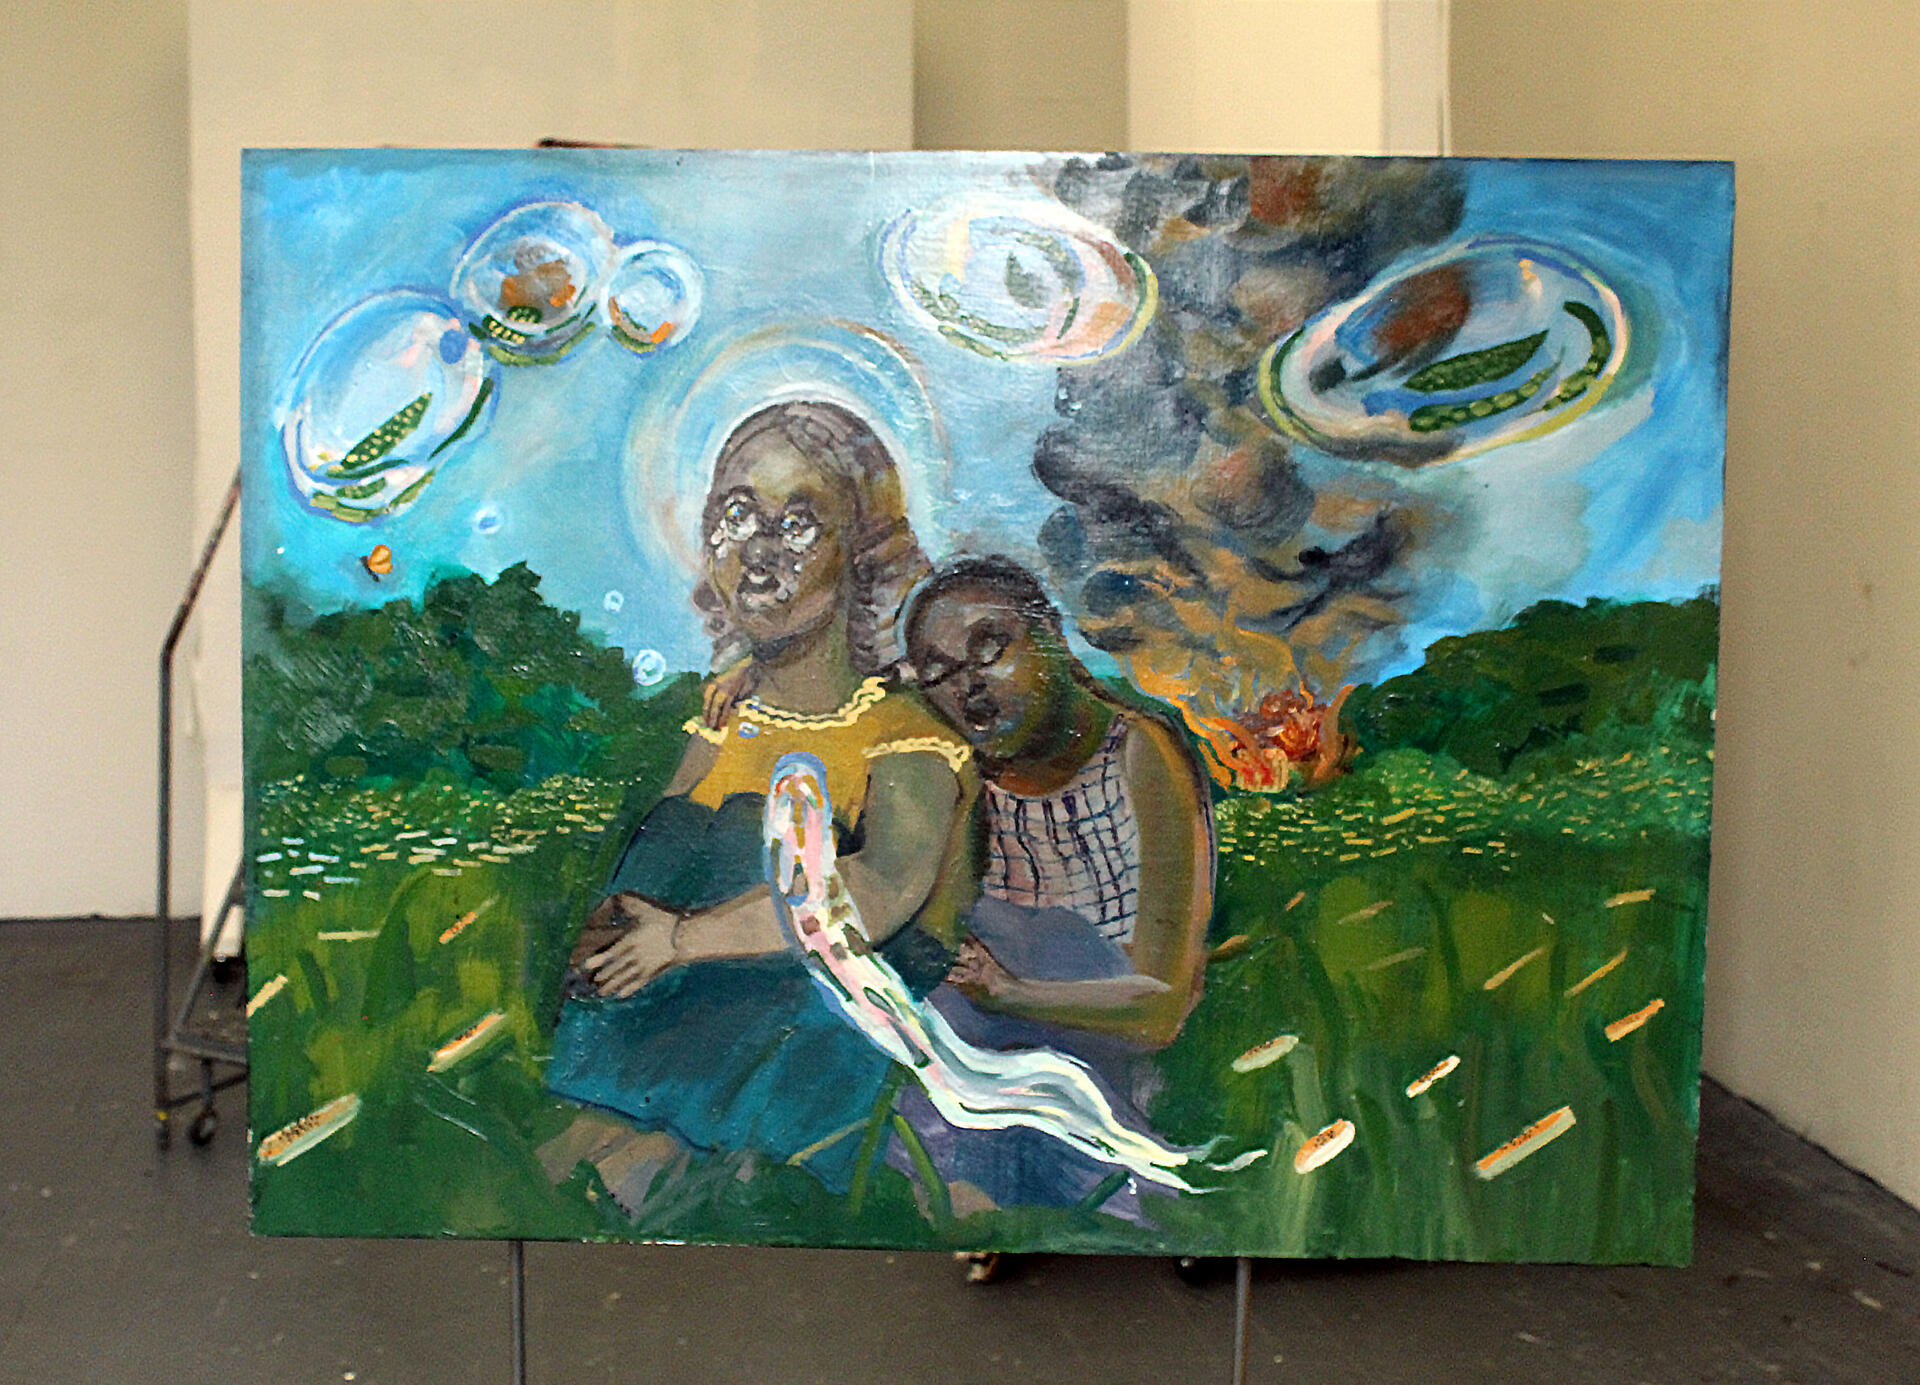 A larger rectangular oil painting on board, supported by a metal structure. The painting depicts two girls sitting in front of a burning house as bubbles float by.